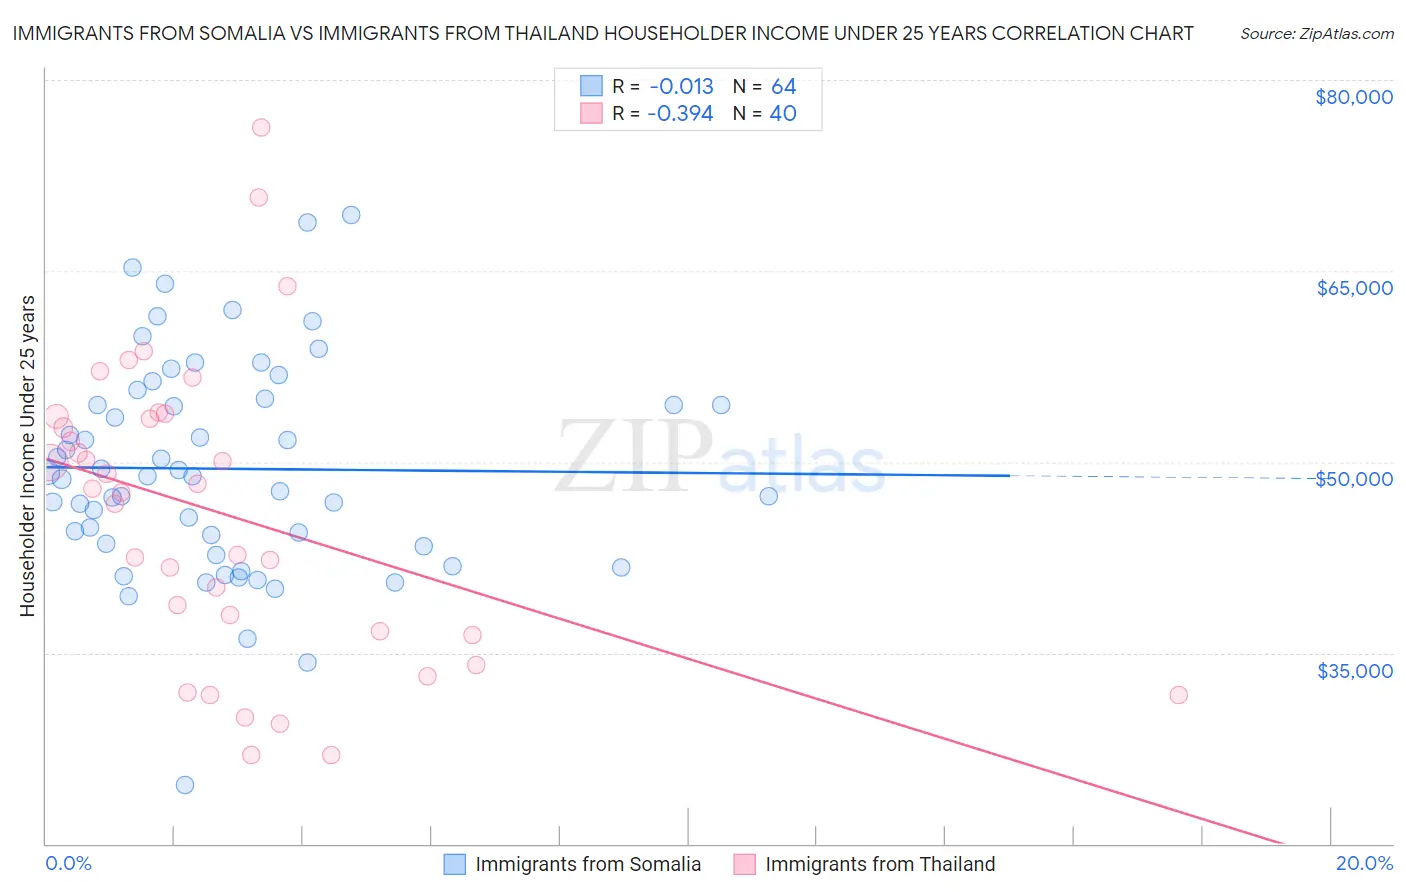 Immigrants from Somalia vs Immigrants from Thailand Householder Income Under 25 years